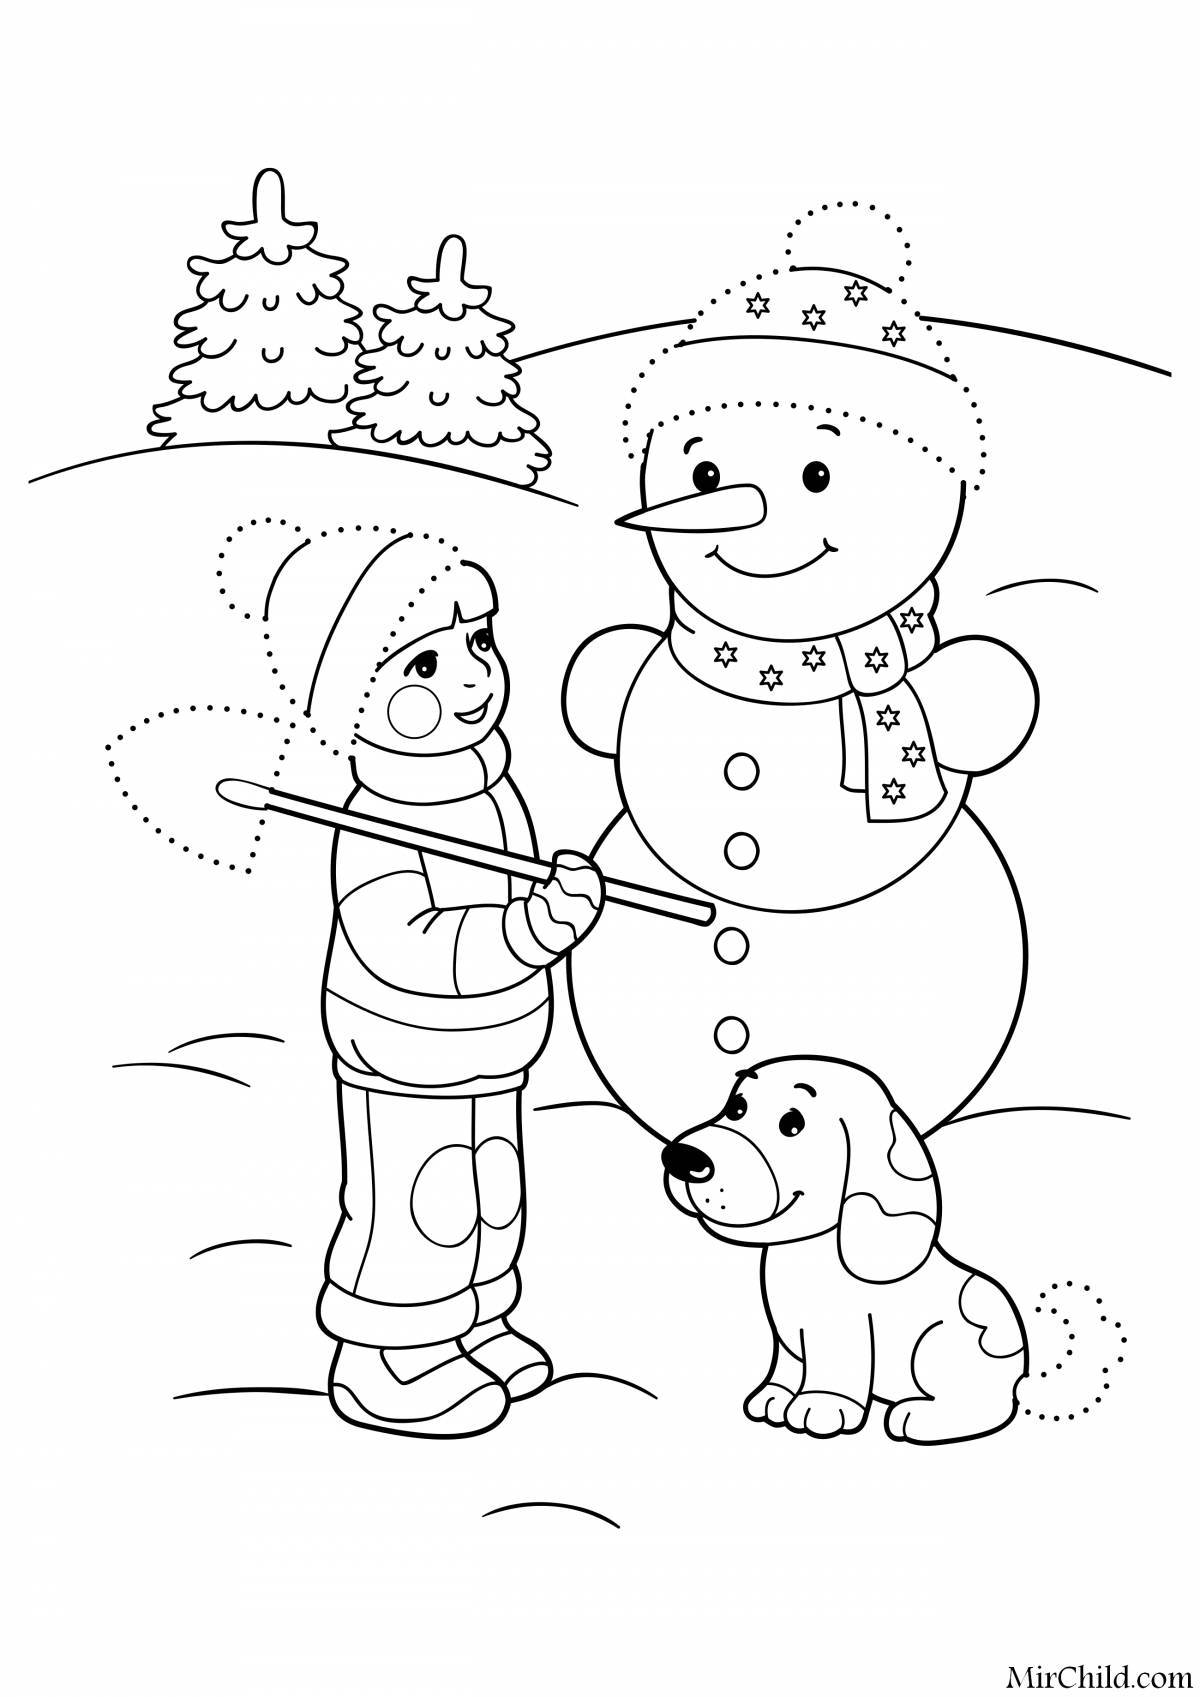 Fun coloring book winter for children 10 years old